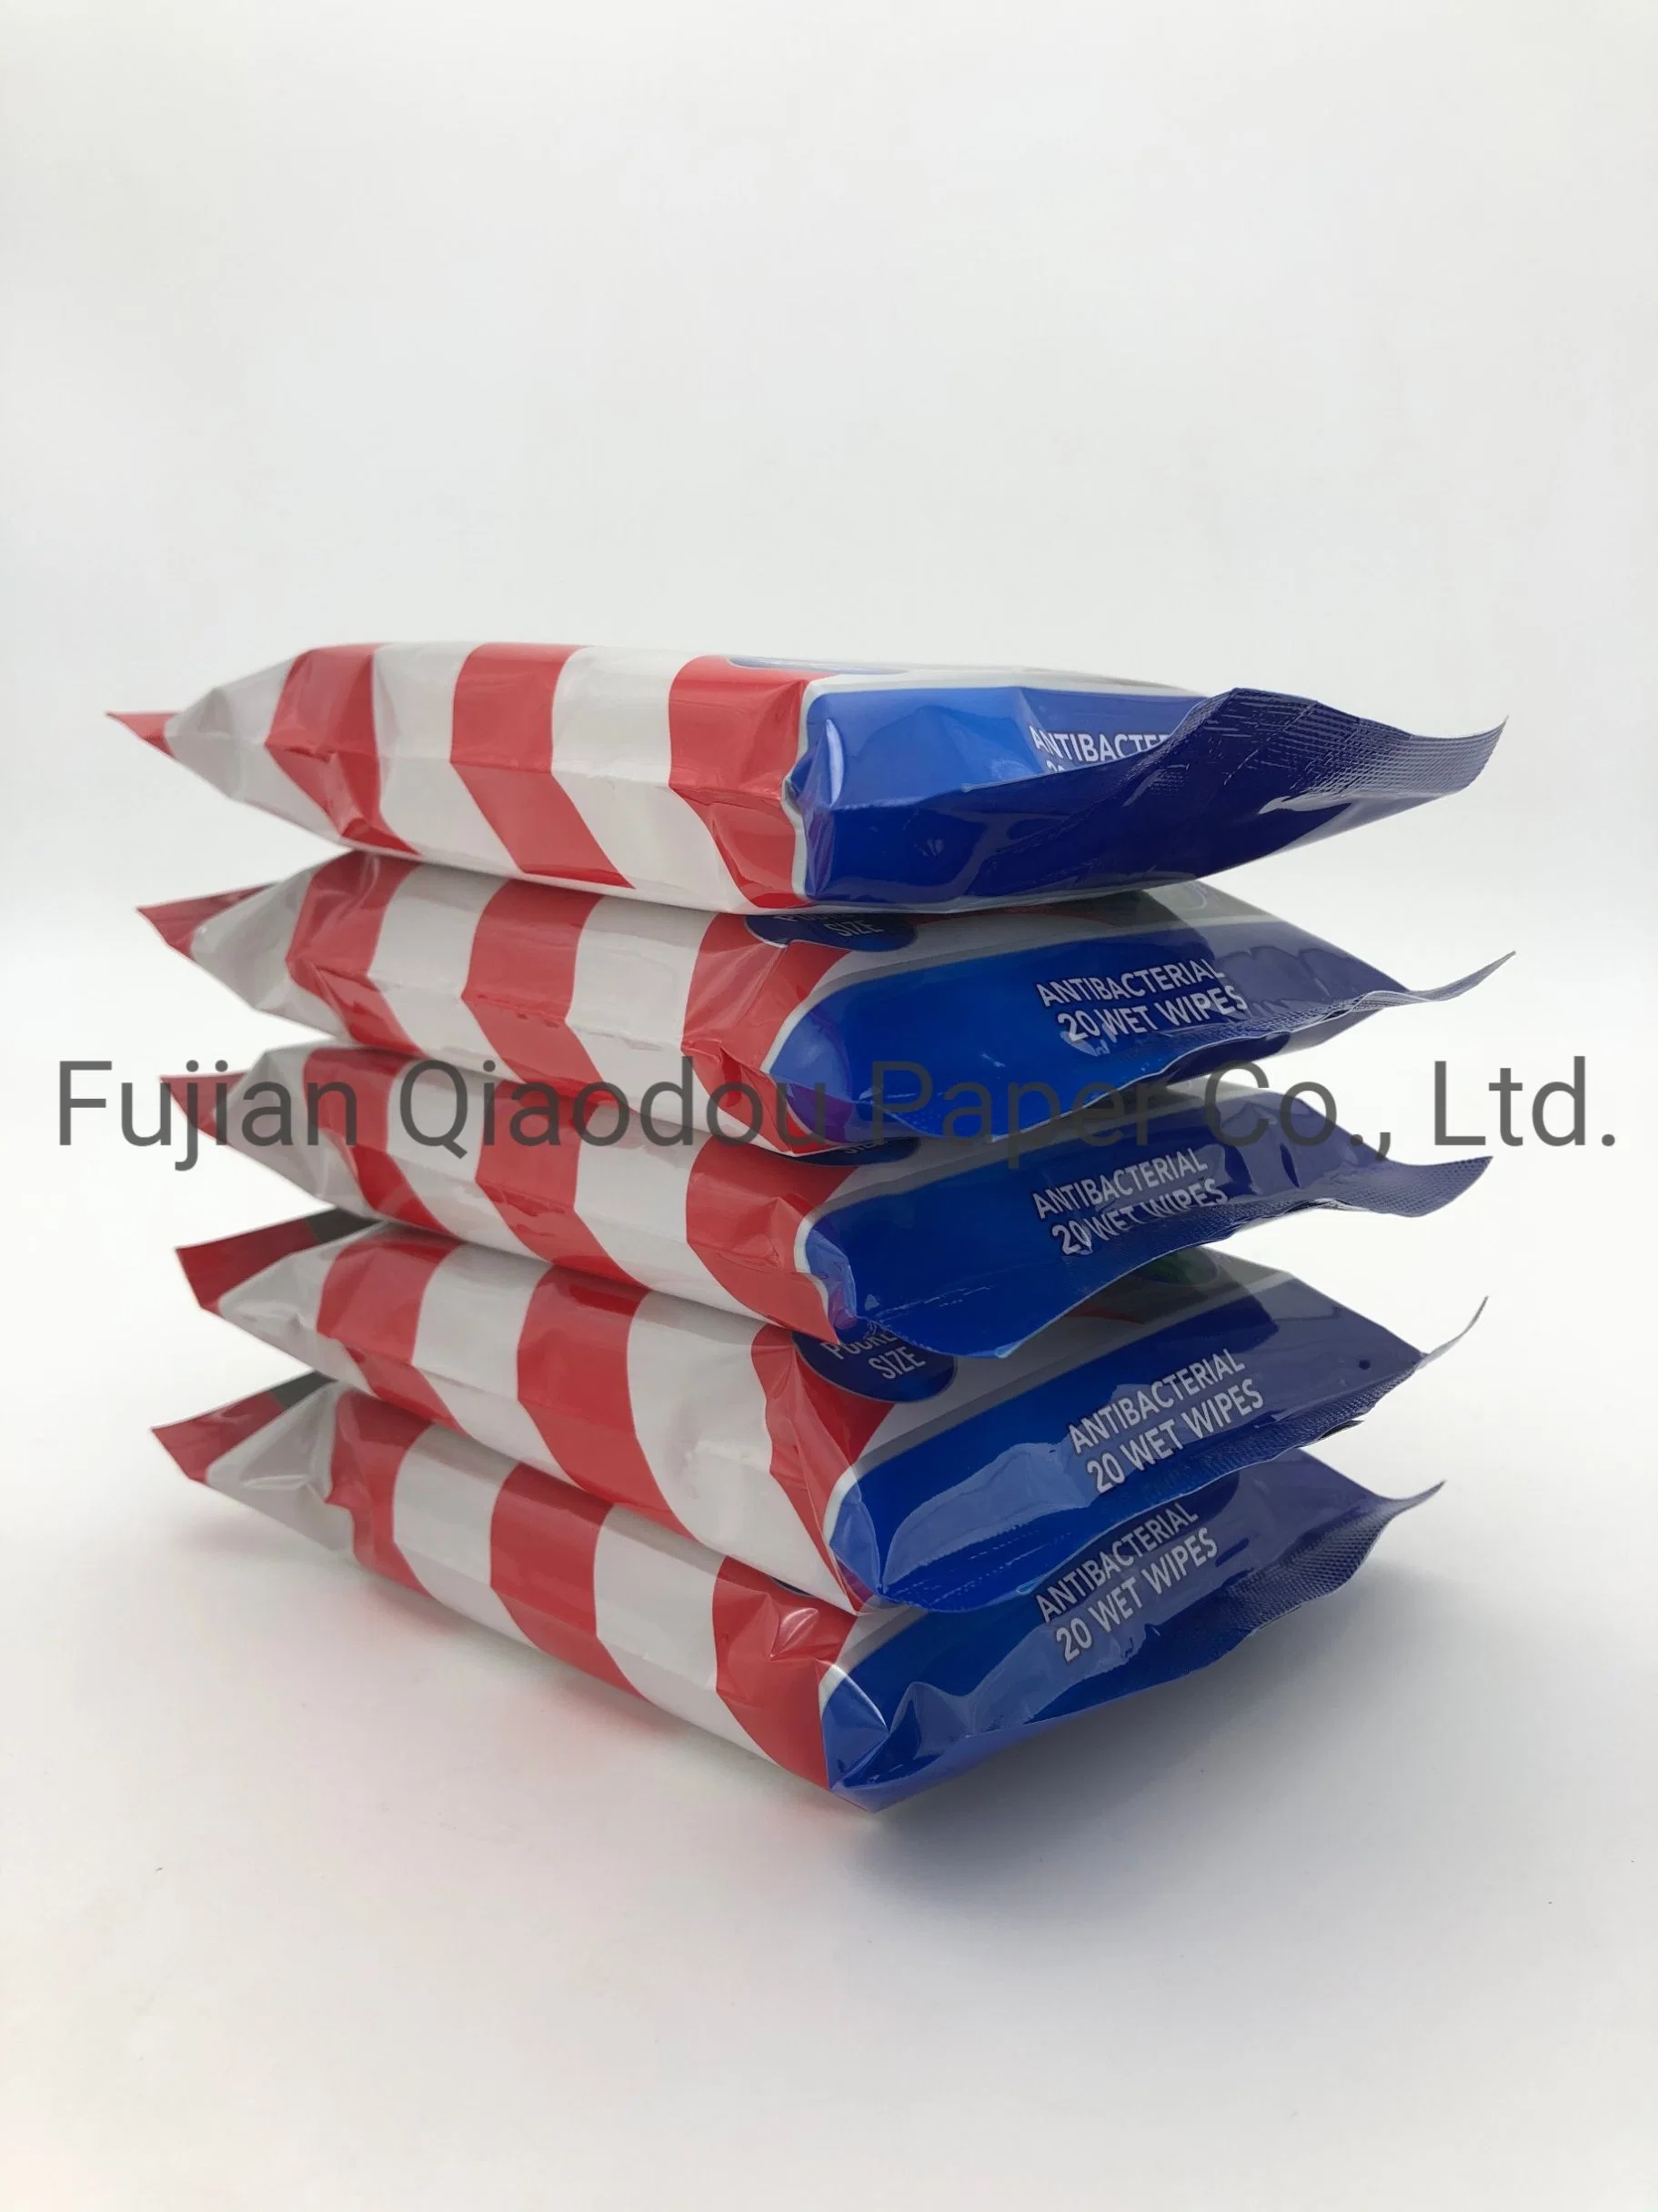 China Qiaodou Manufacturer 75% Alcohol Portable Cleaning Wet Wipes Disinfectant Wipes Antibacterial Cleaning Wipes